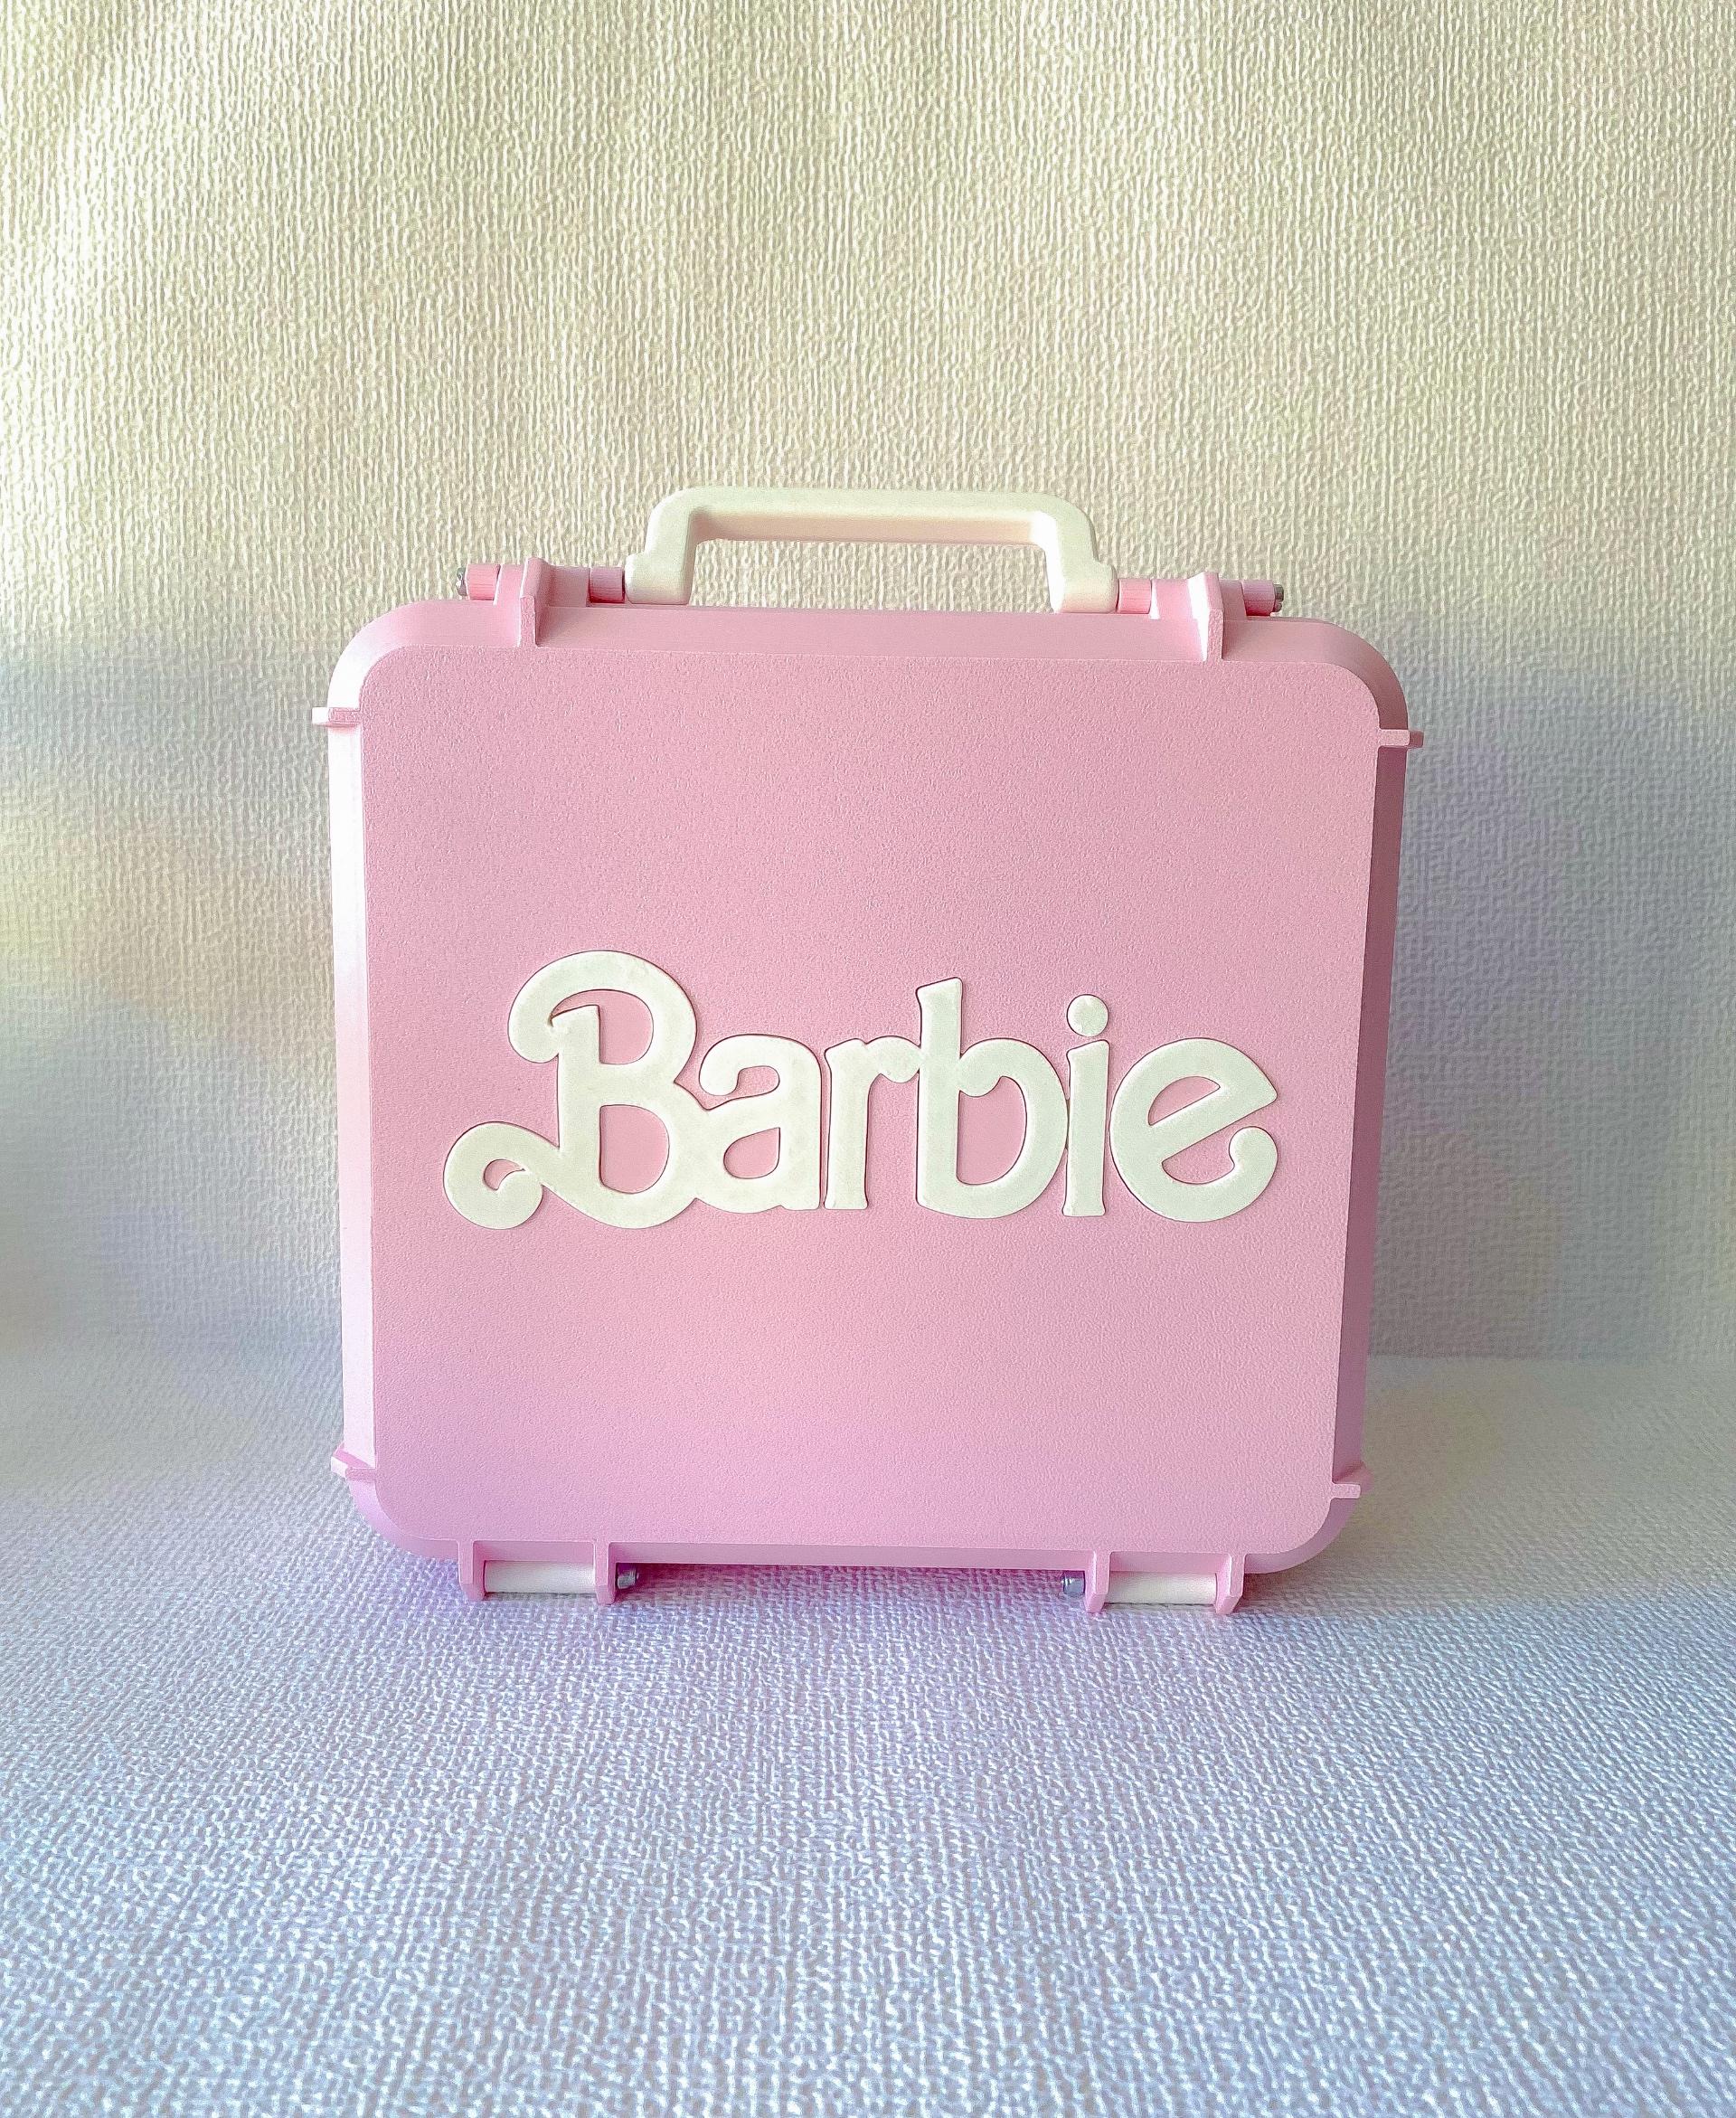 Barbie Box Rotated Logo Multipart - Check out this cute barbie suitcase!
Polymaker filament - 3d model